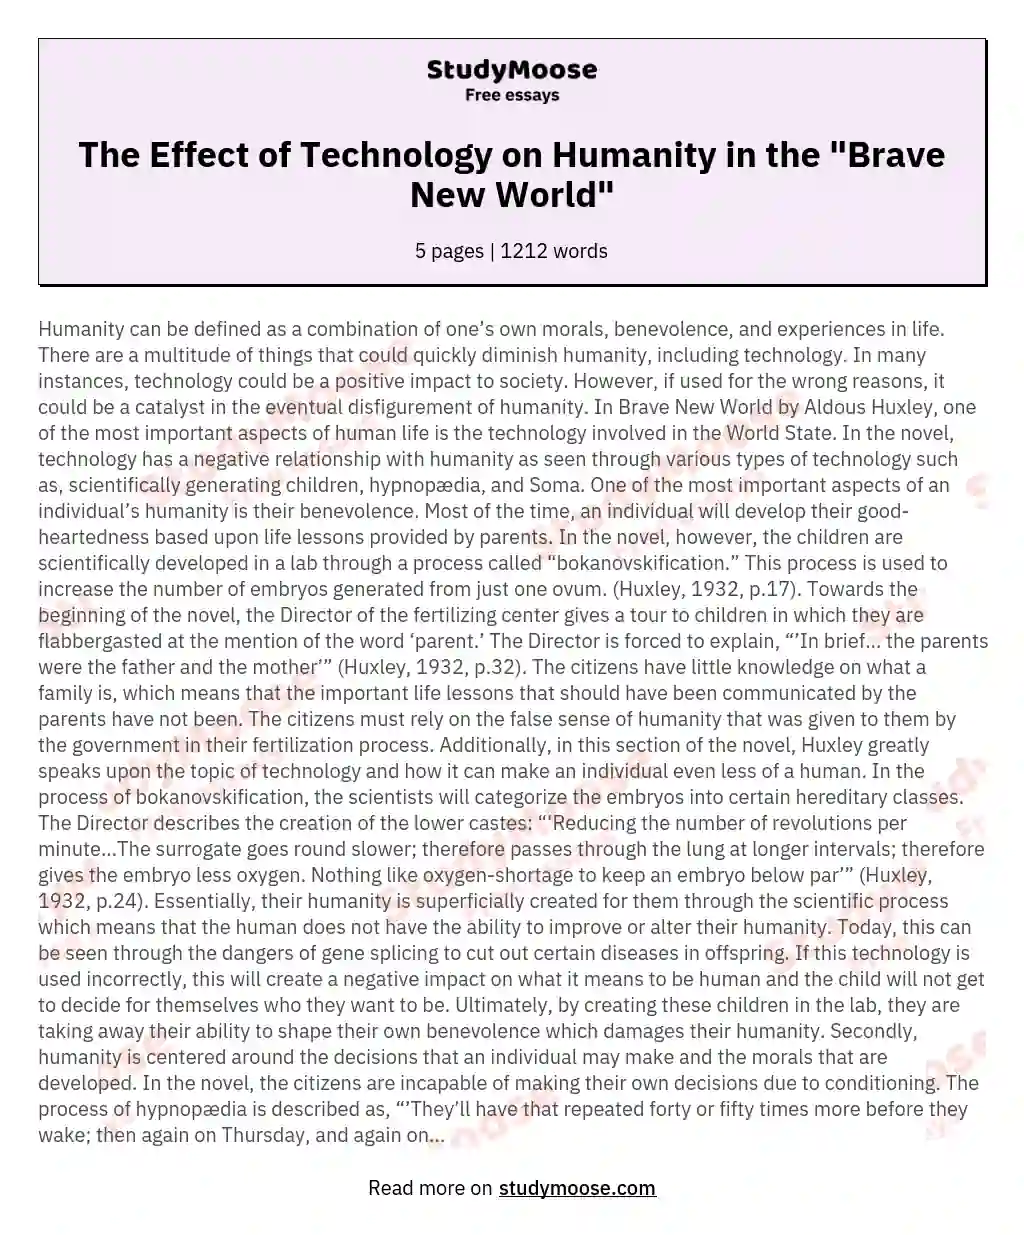 The Effect of Technology on Humanity in the "Brave New World"